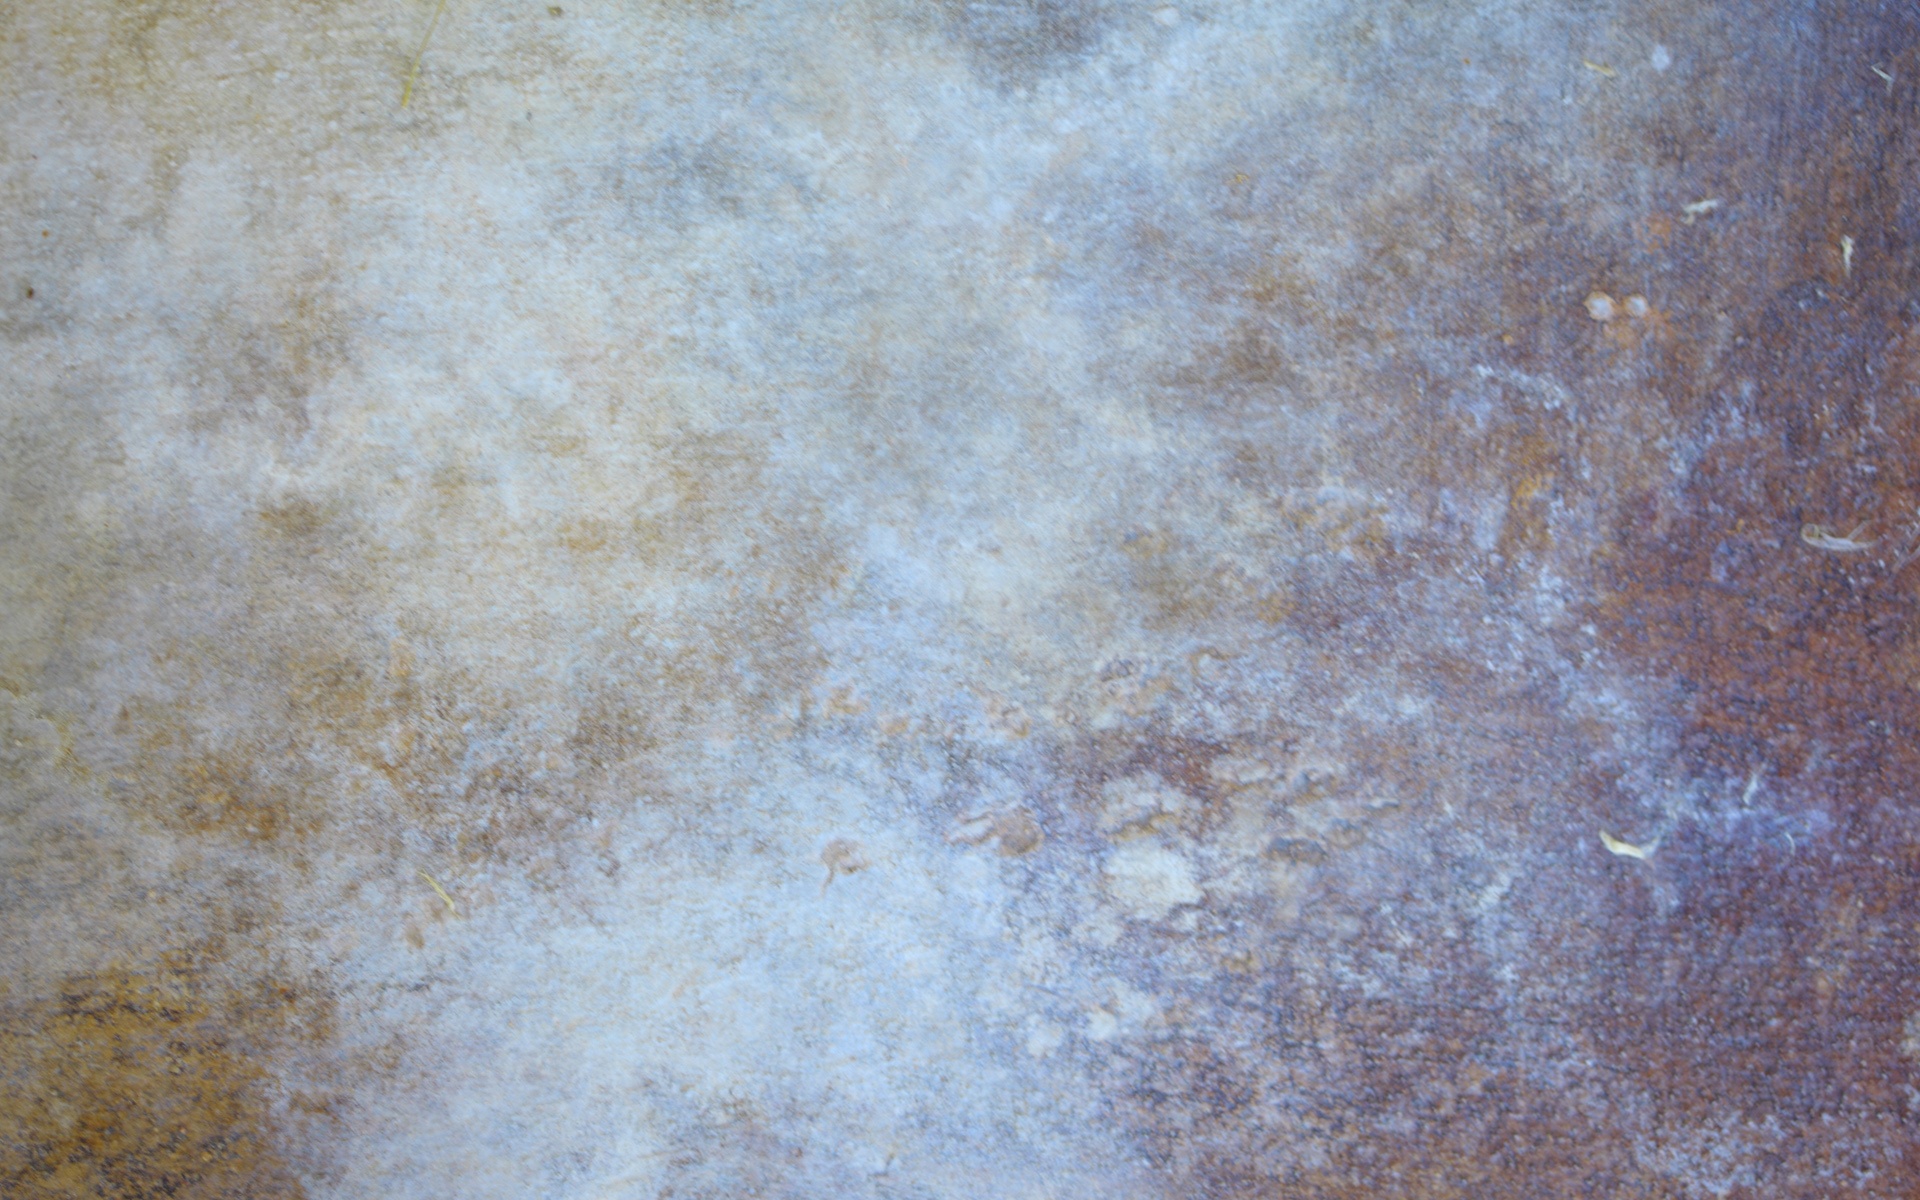 Milky Cloudy Rust Stained Pavement Texture